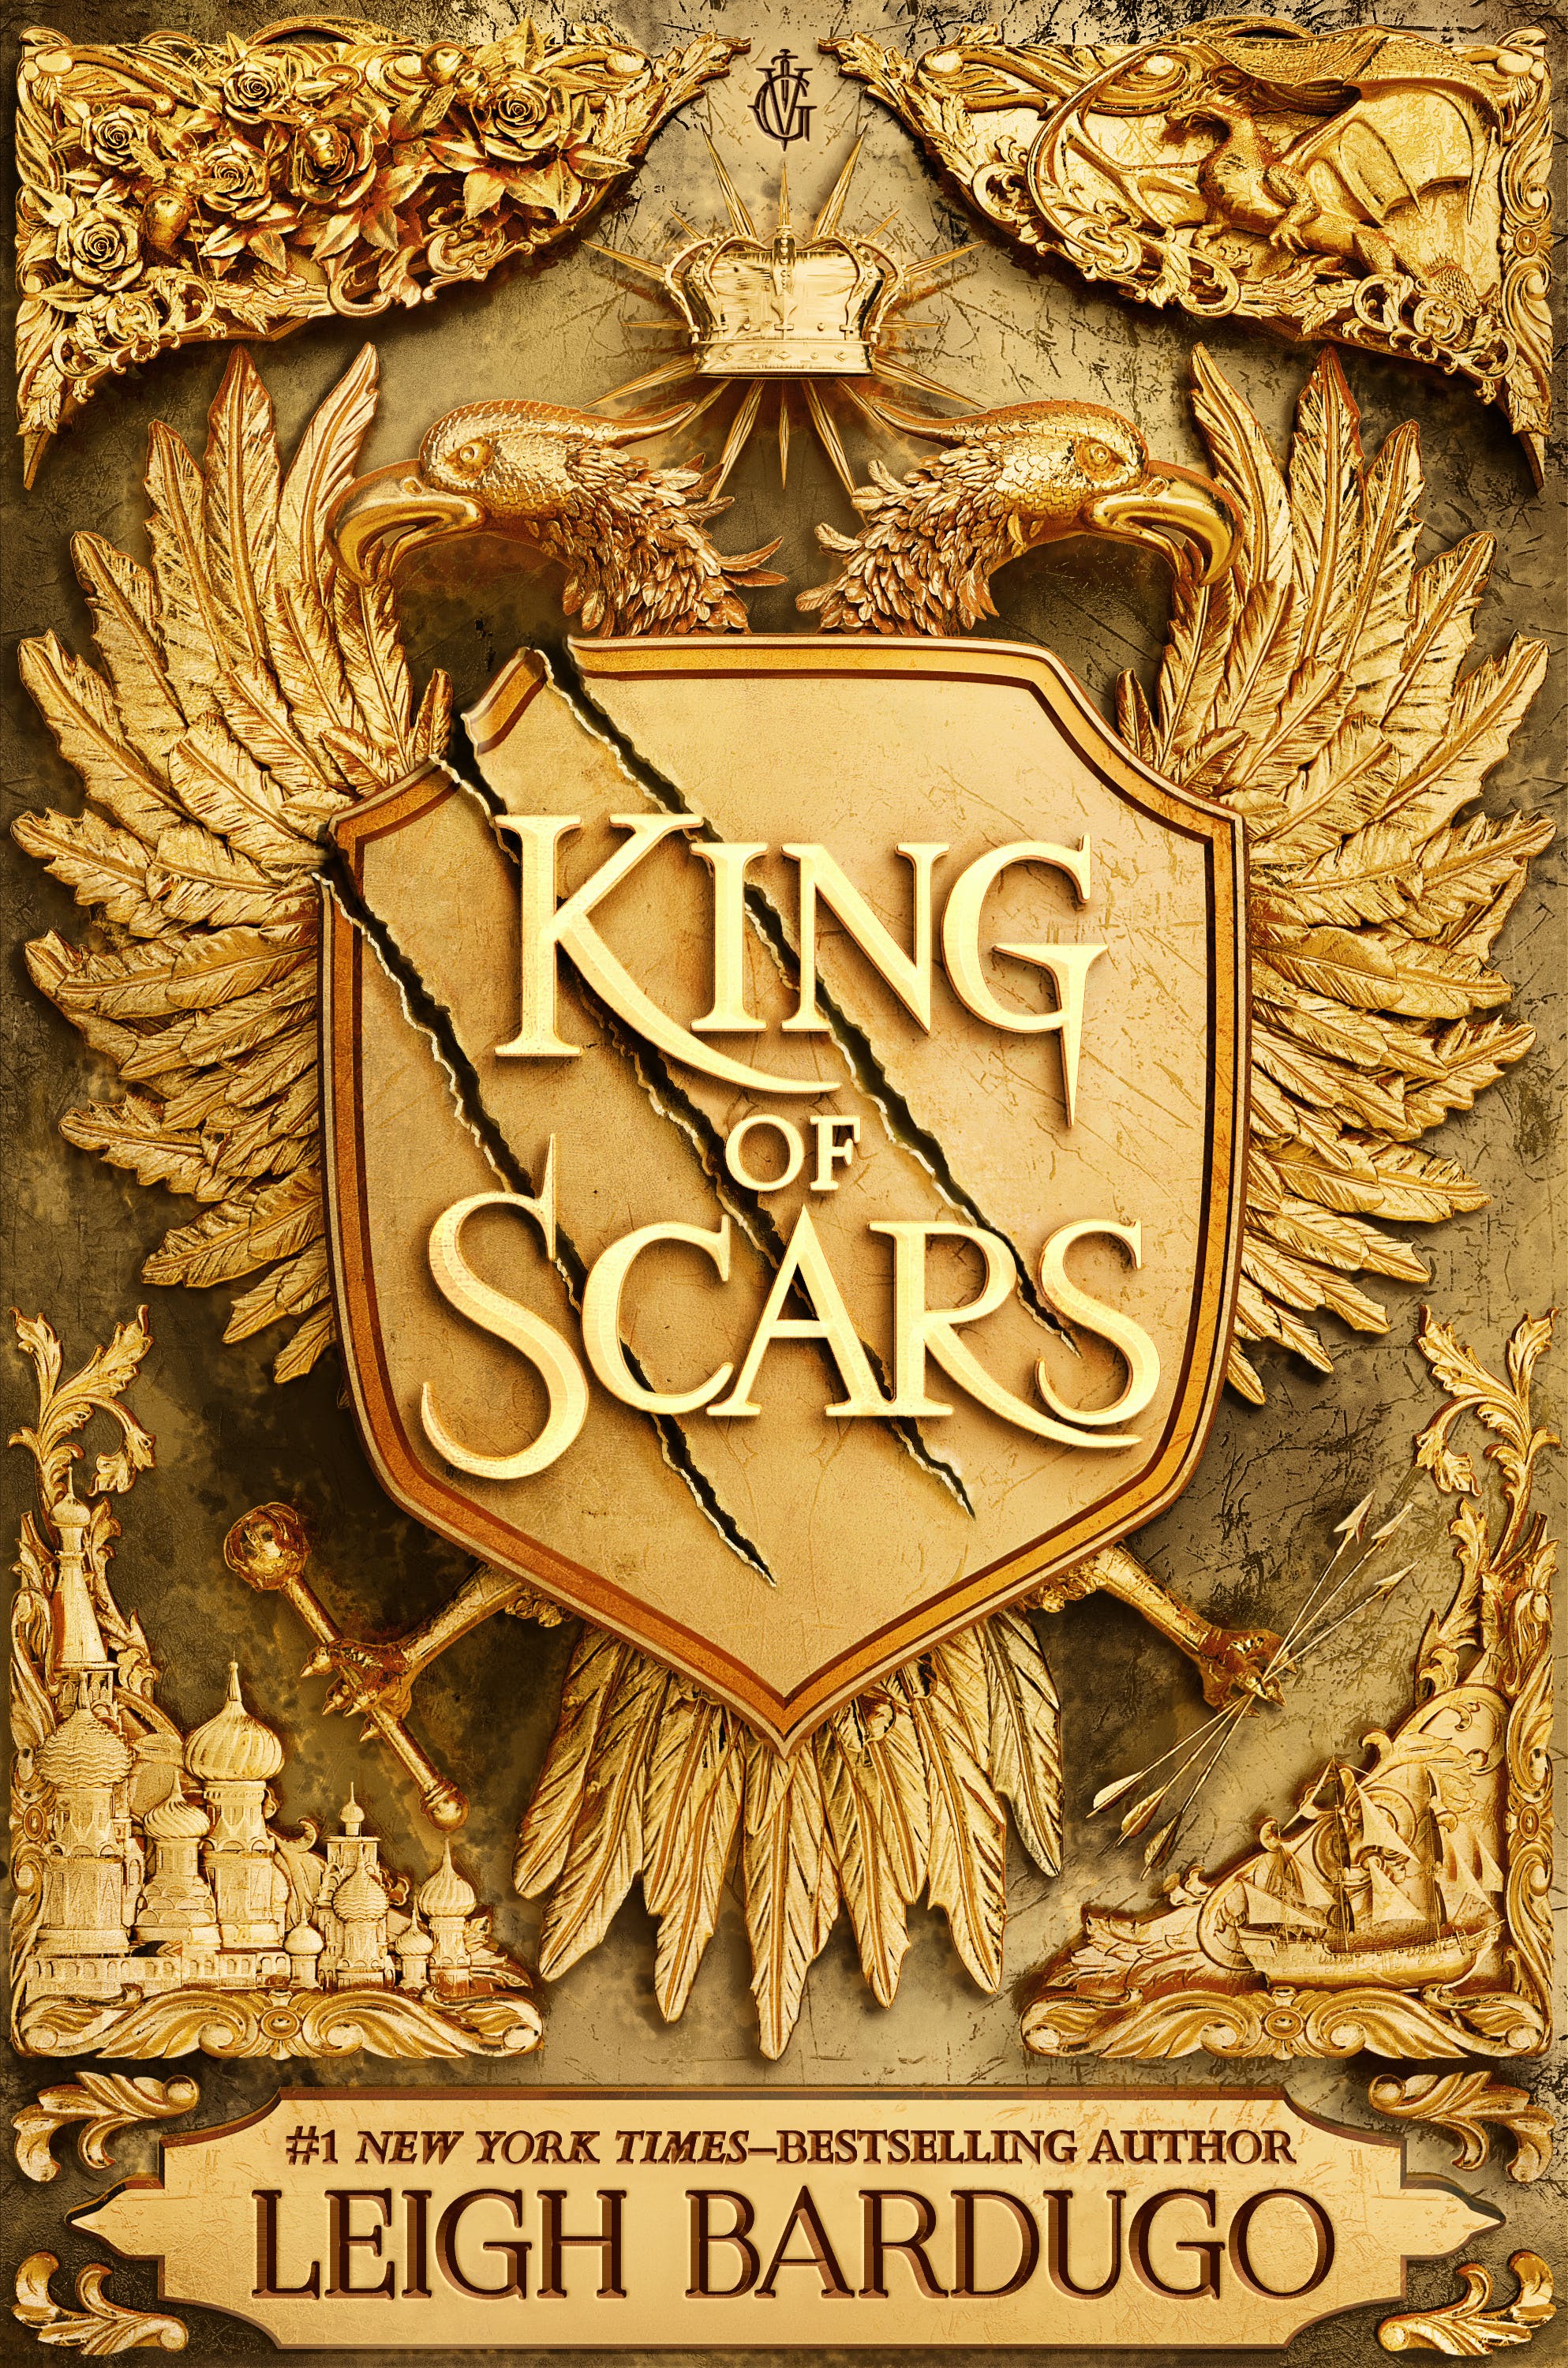 bardugo leigh king of scars 2 rule of wolves Bardugo Leigh King of Scars